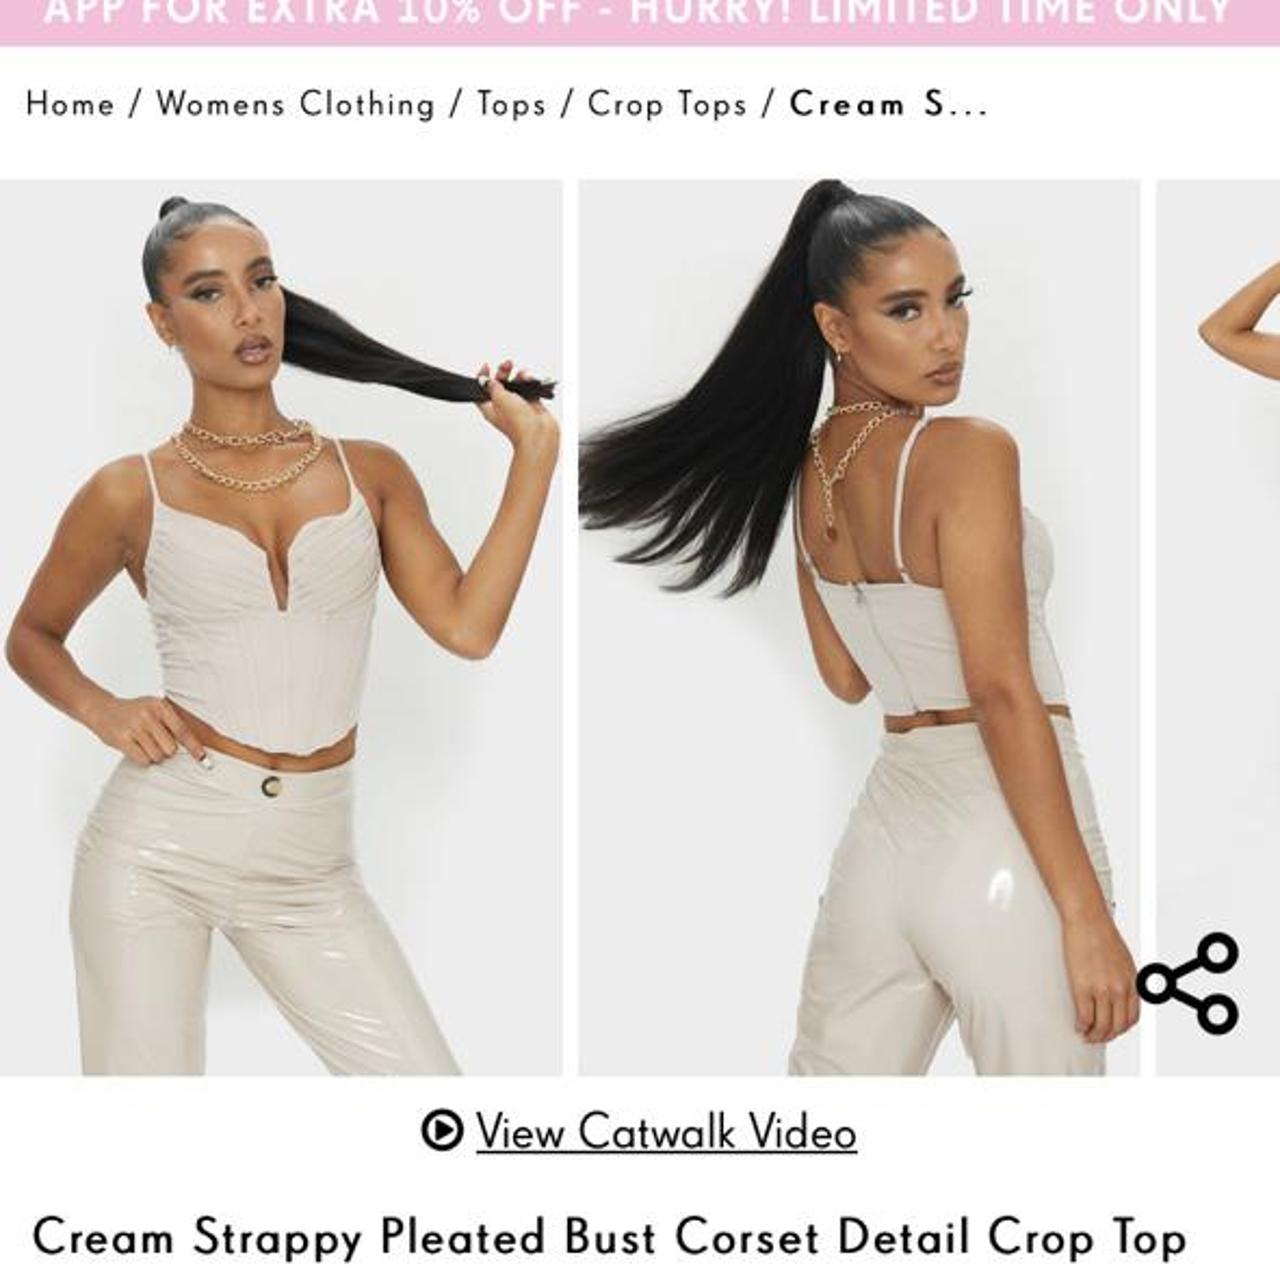 Cream Strappy Pleated Bust Corset Crop Top